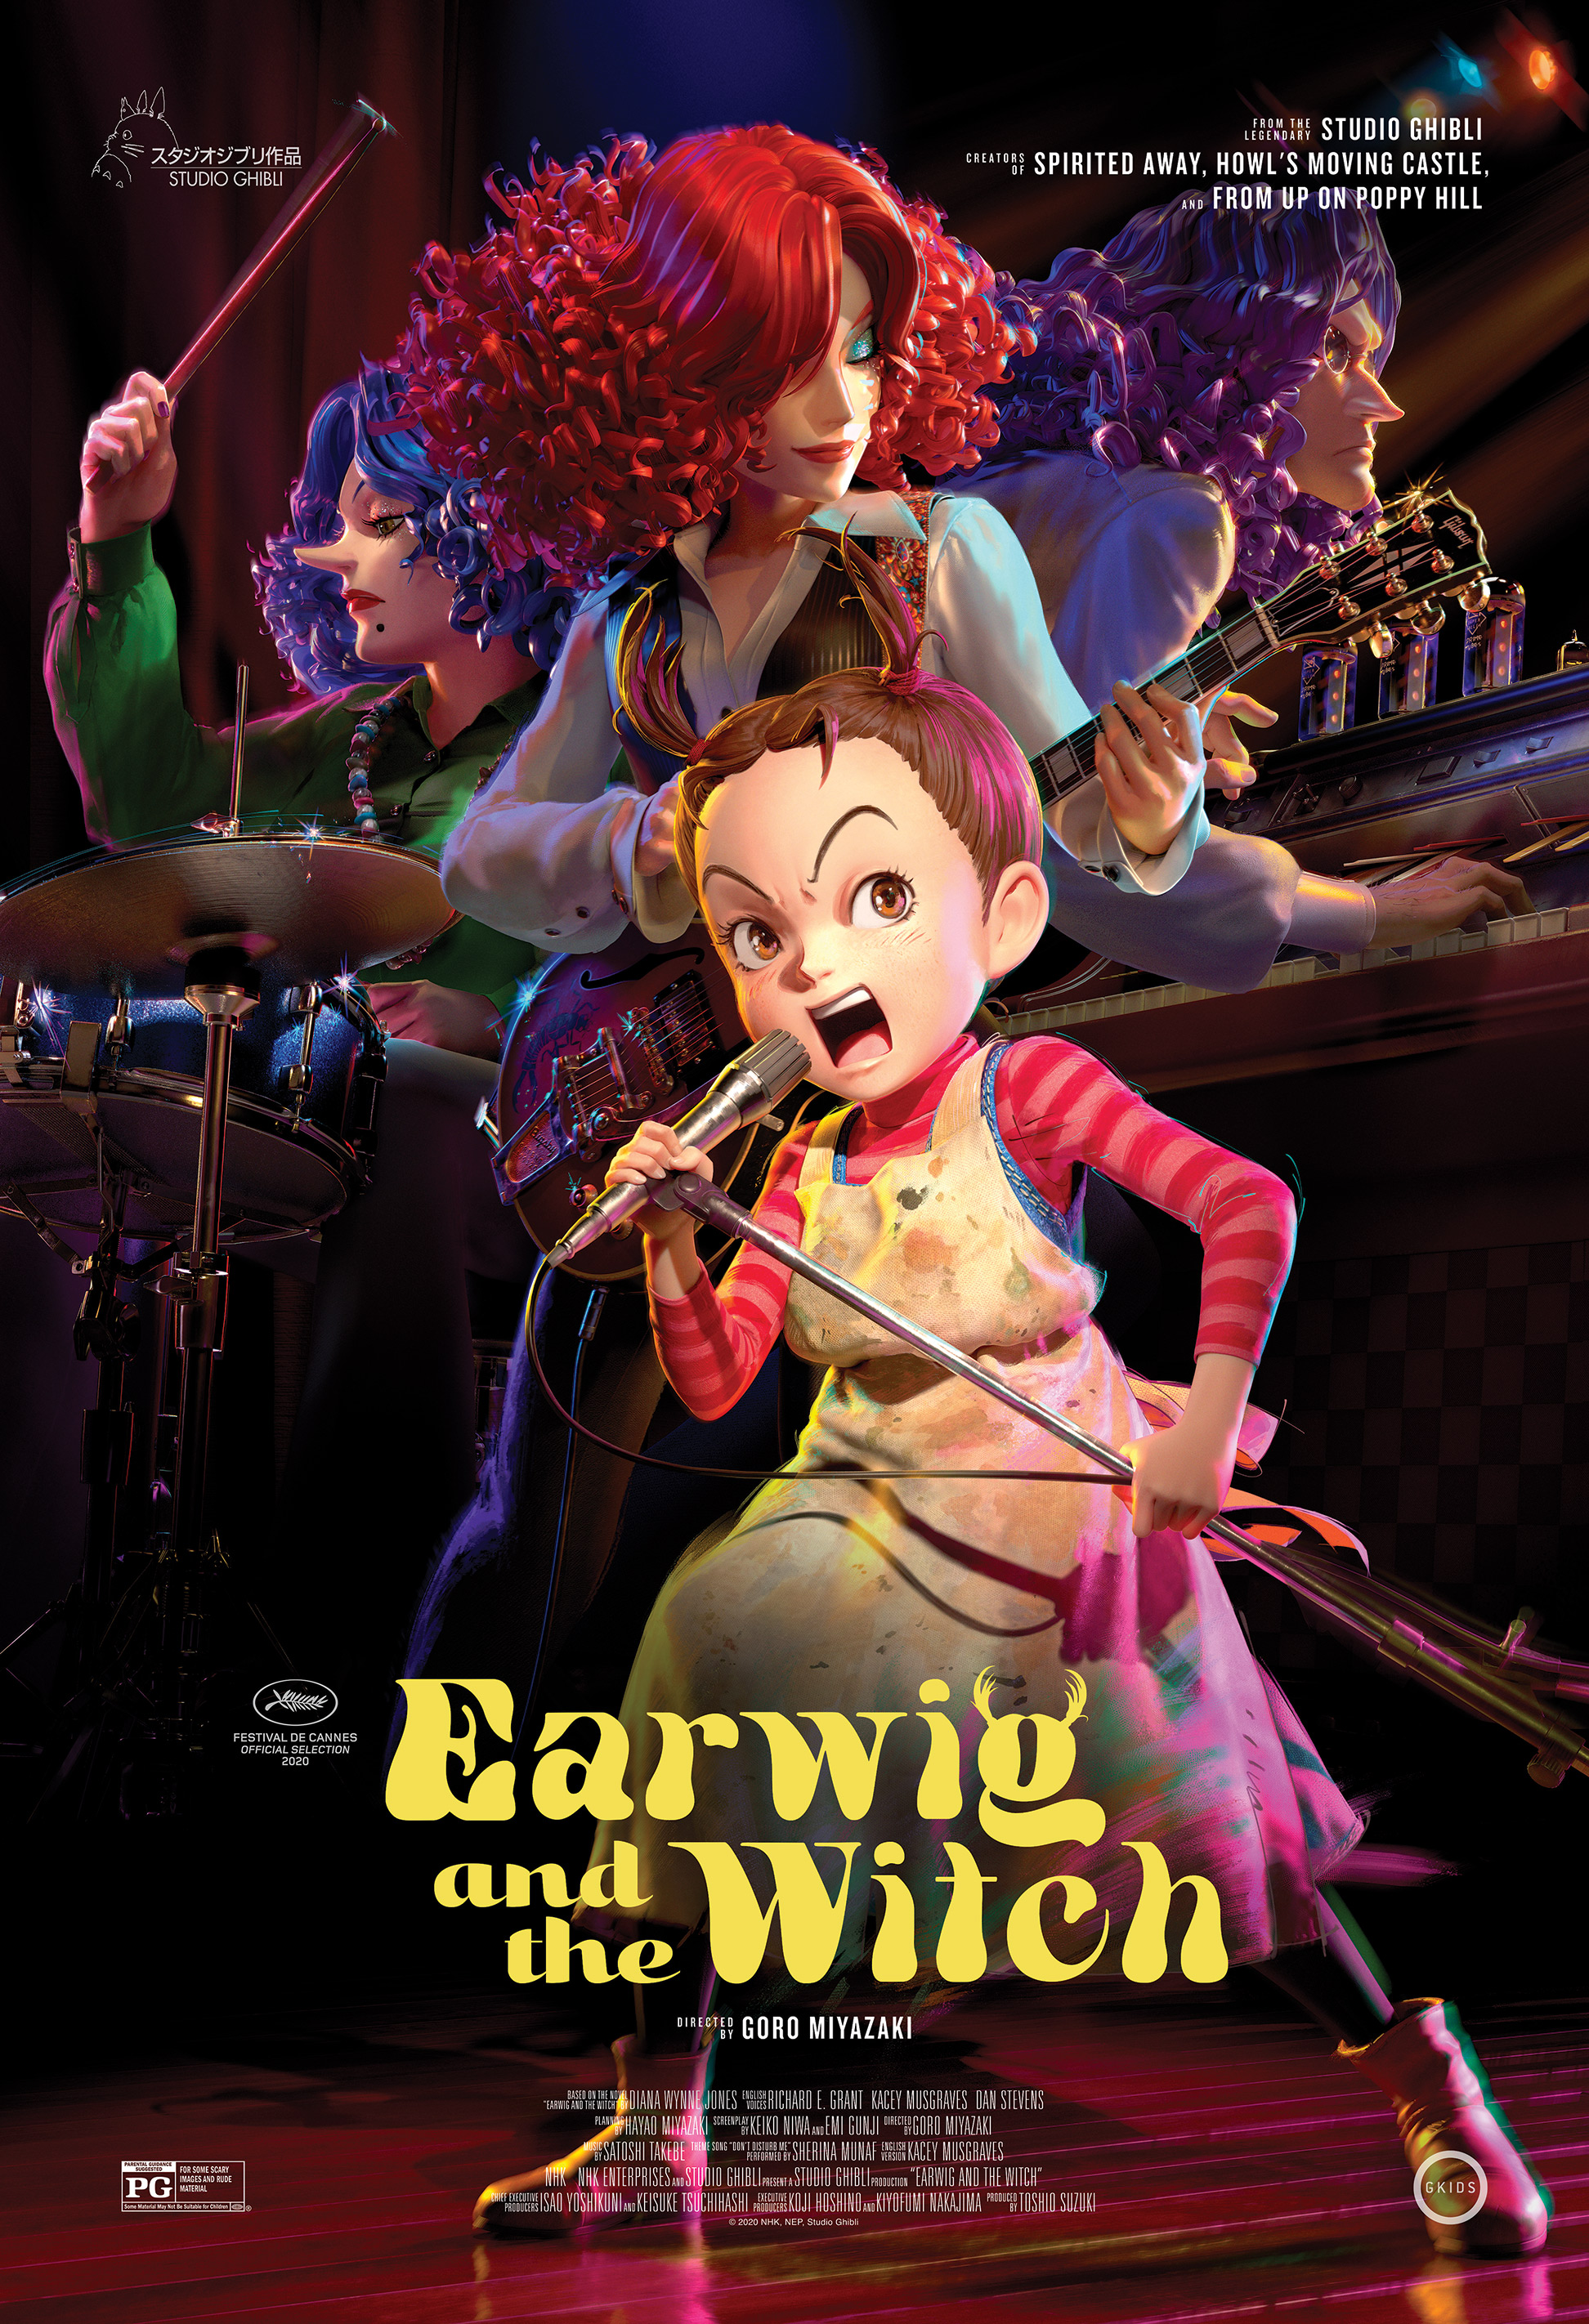 Earwig and the Witch Poster. Image courtesy GKIDS